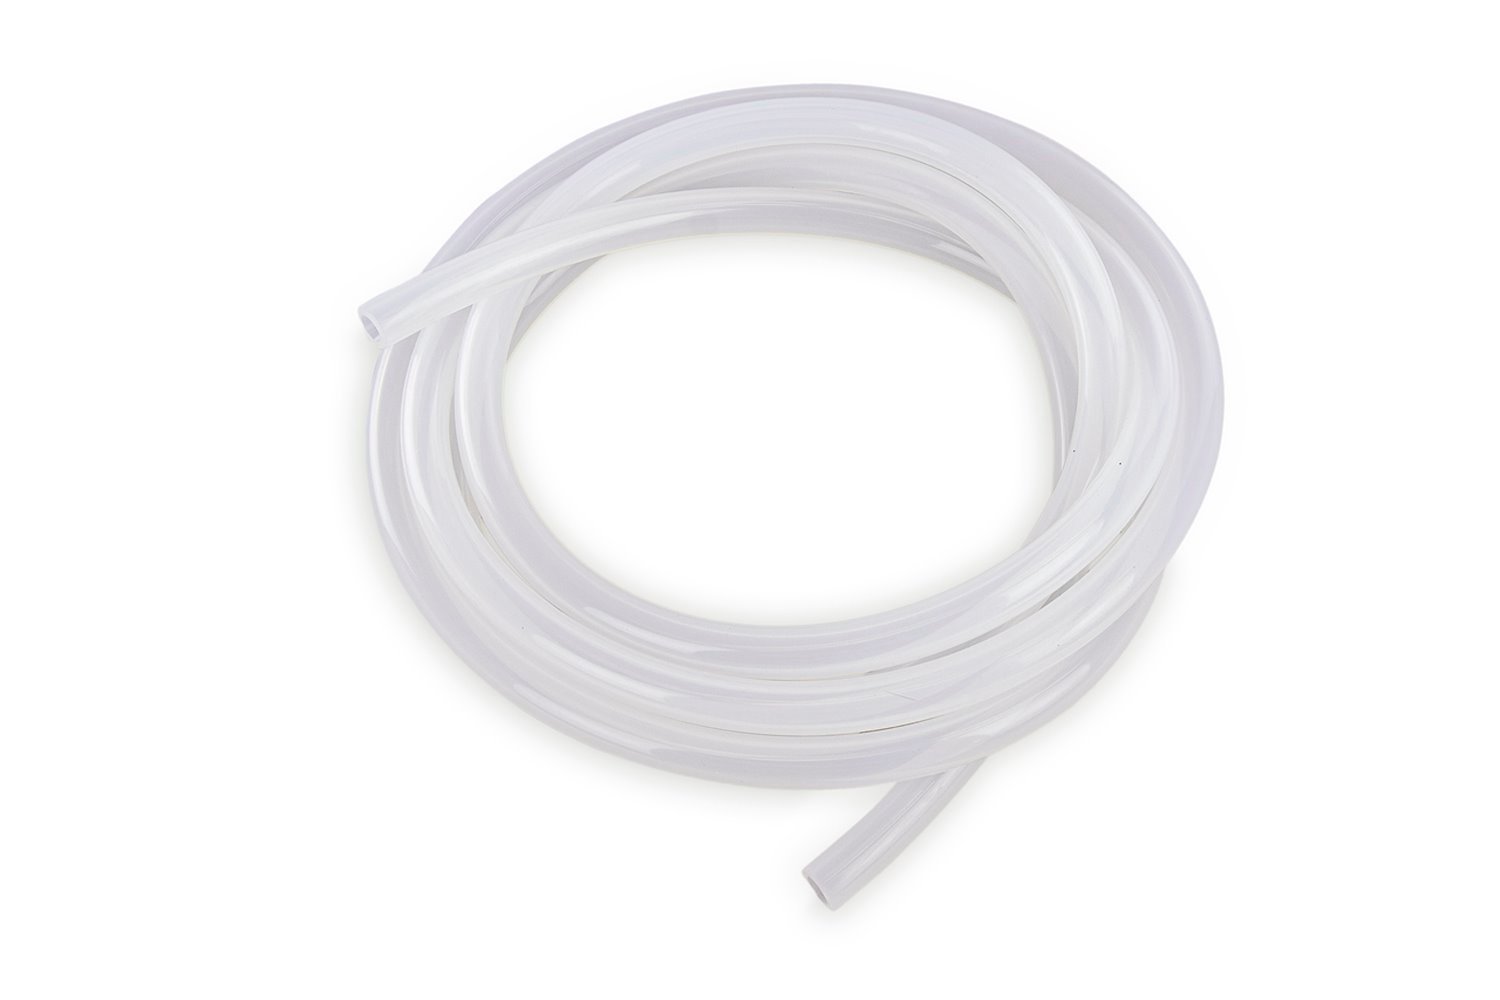 HTSVH95-CLEARx10 High-Temperature Silicone Vacuum Hose Tubing, 3/8 in. ID, 10 ft. Roll, Clear